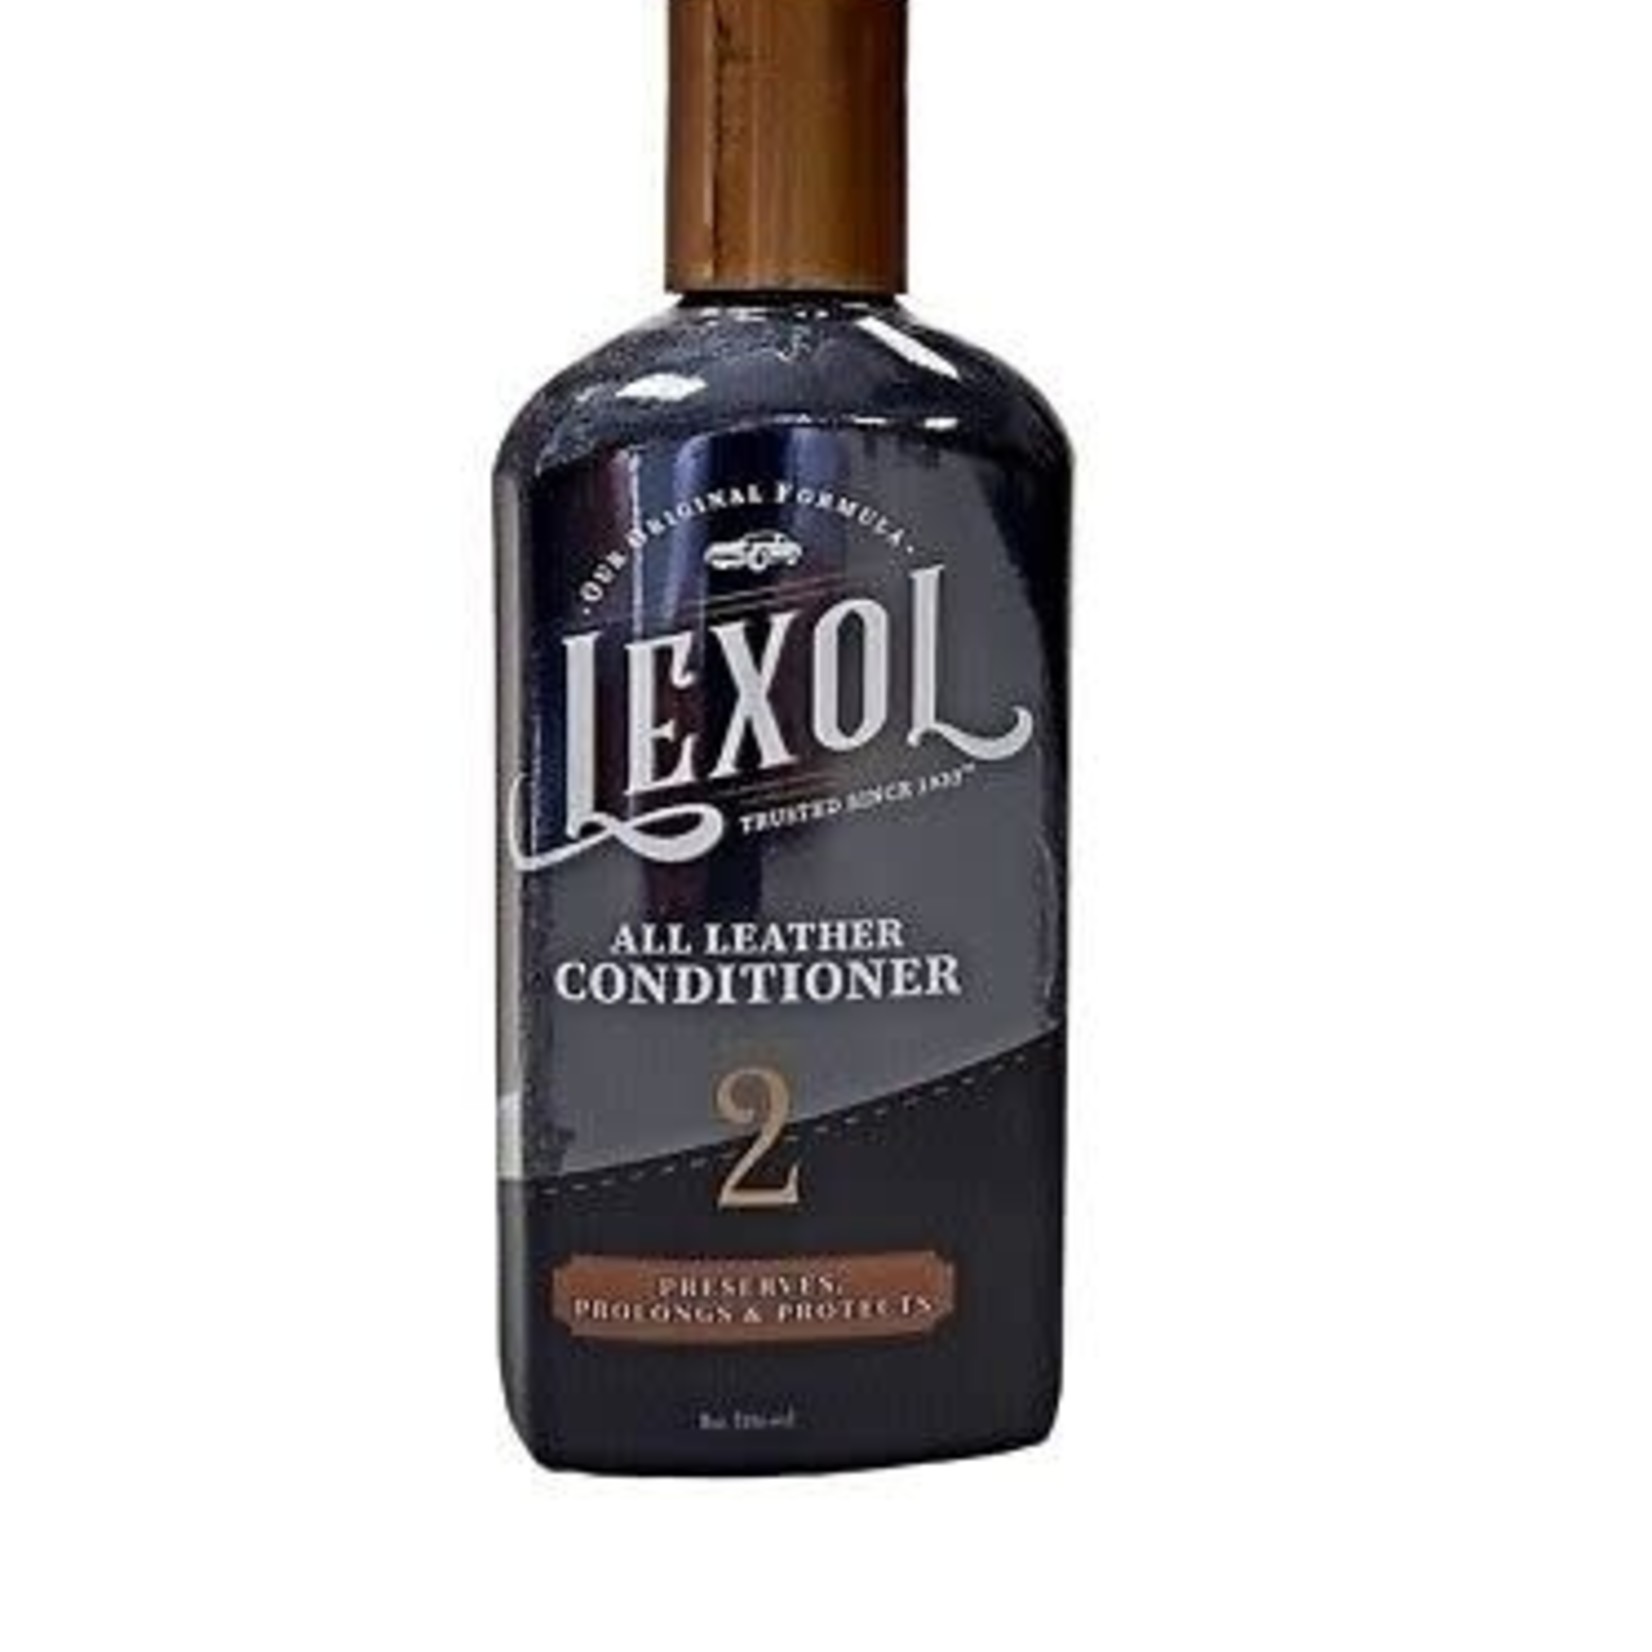 Lexol Leather Care Conditioner